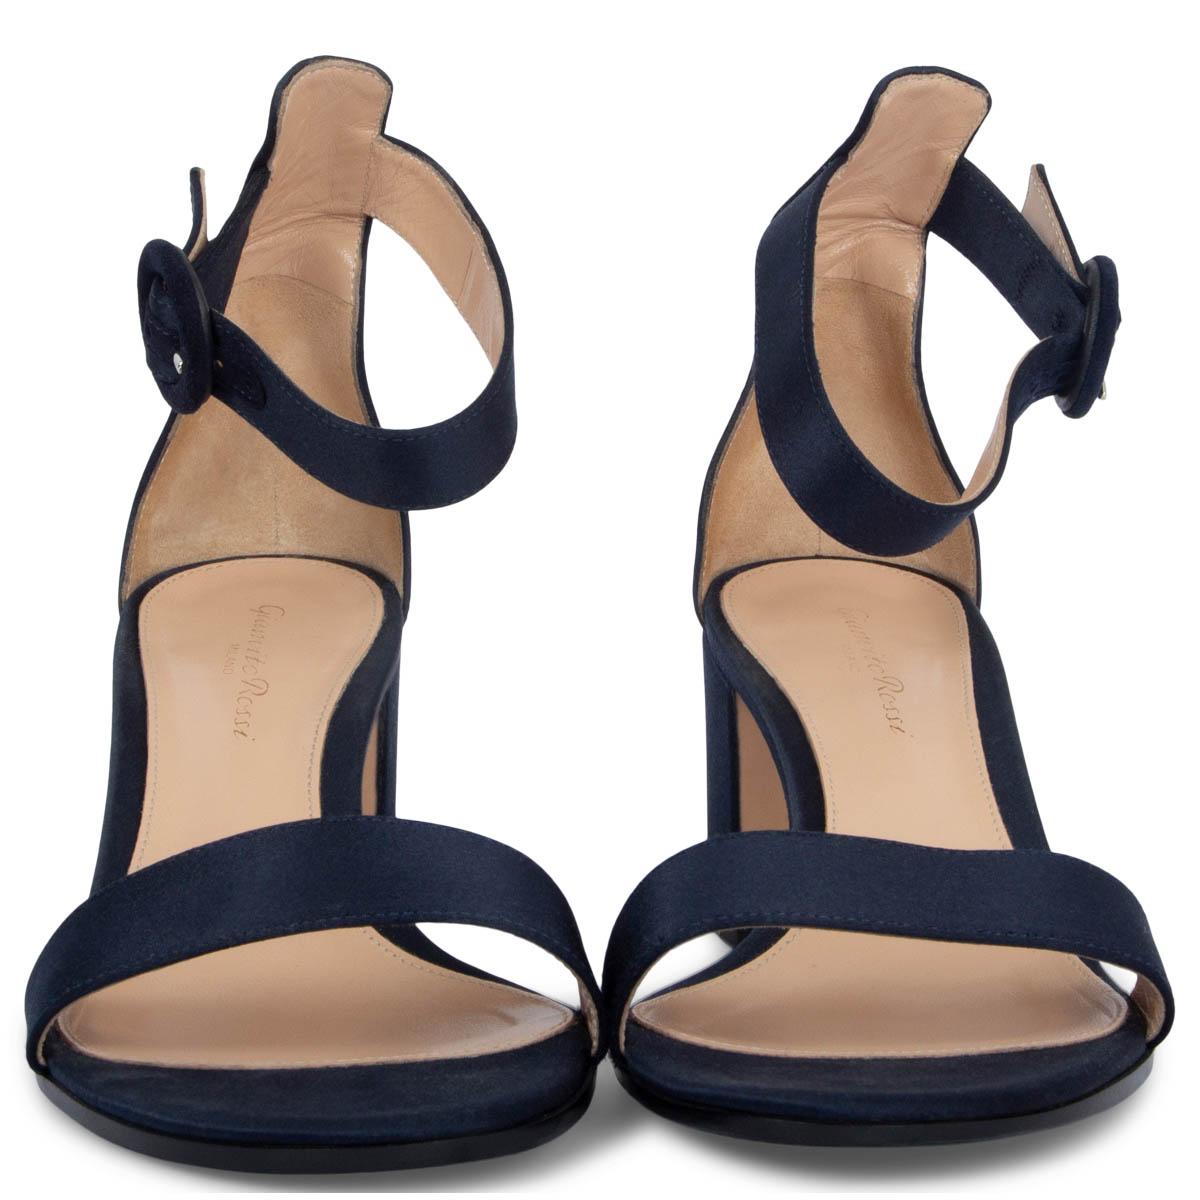 100% authentic Gianvito Rossi Versilia 60 sandals in navy blue satin with a single band across the toe and an ankle strap. Have been worn once or twice and are in excellent condition. 

Measurements
Imprinted Size	38
Shoe Size	38
Inside Sole	25cm